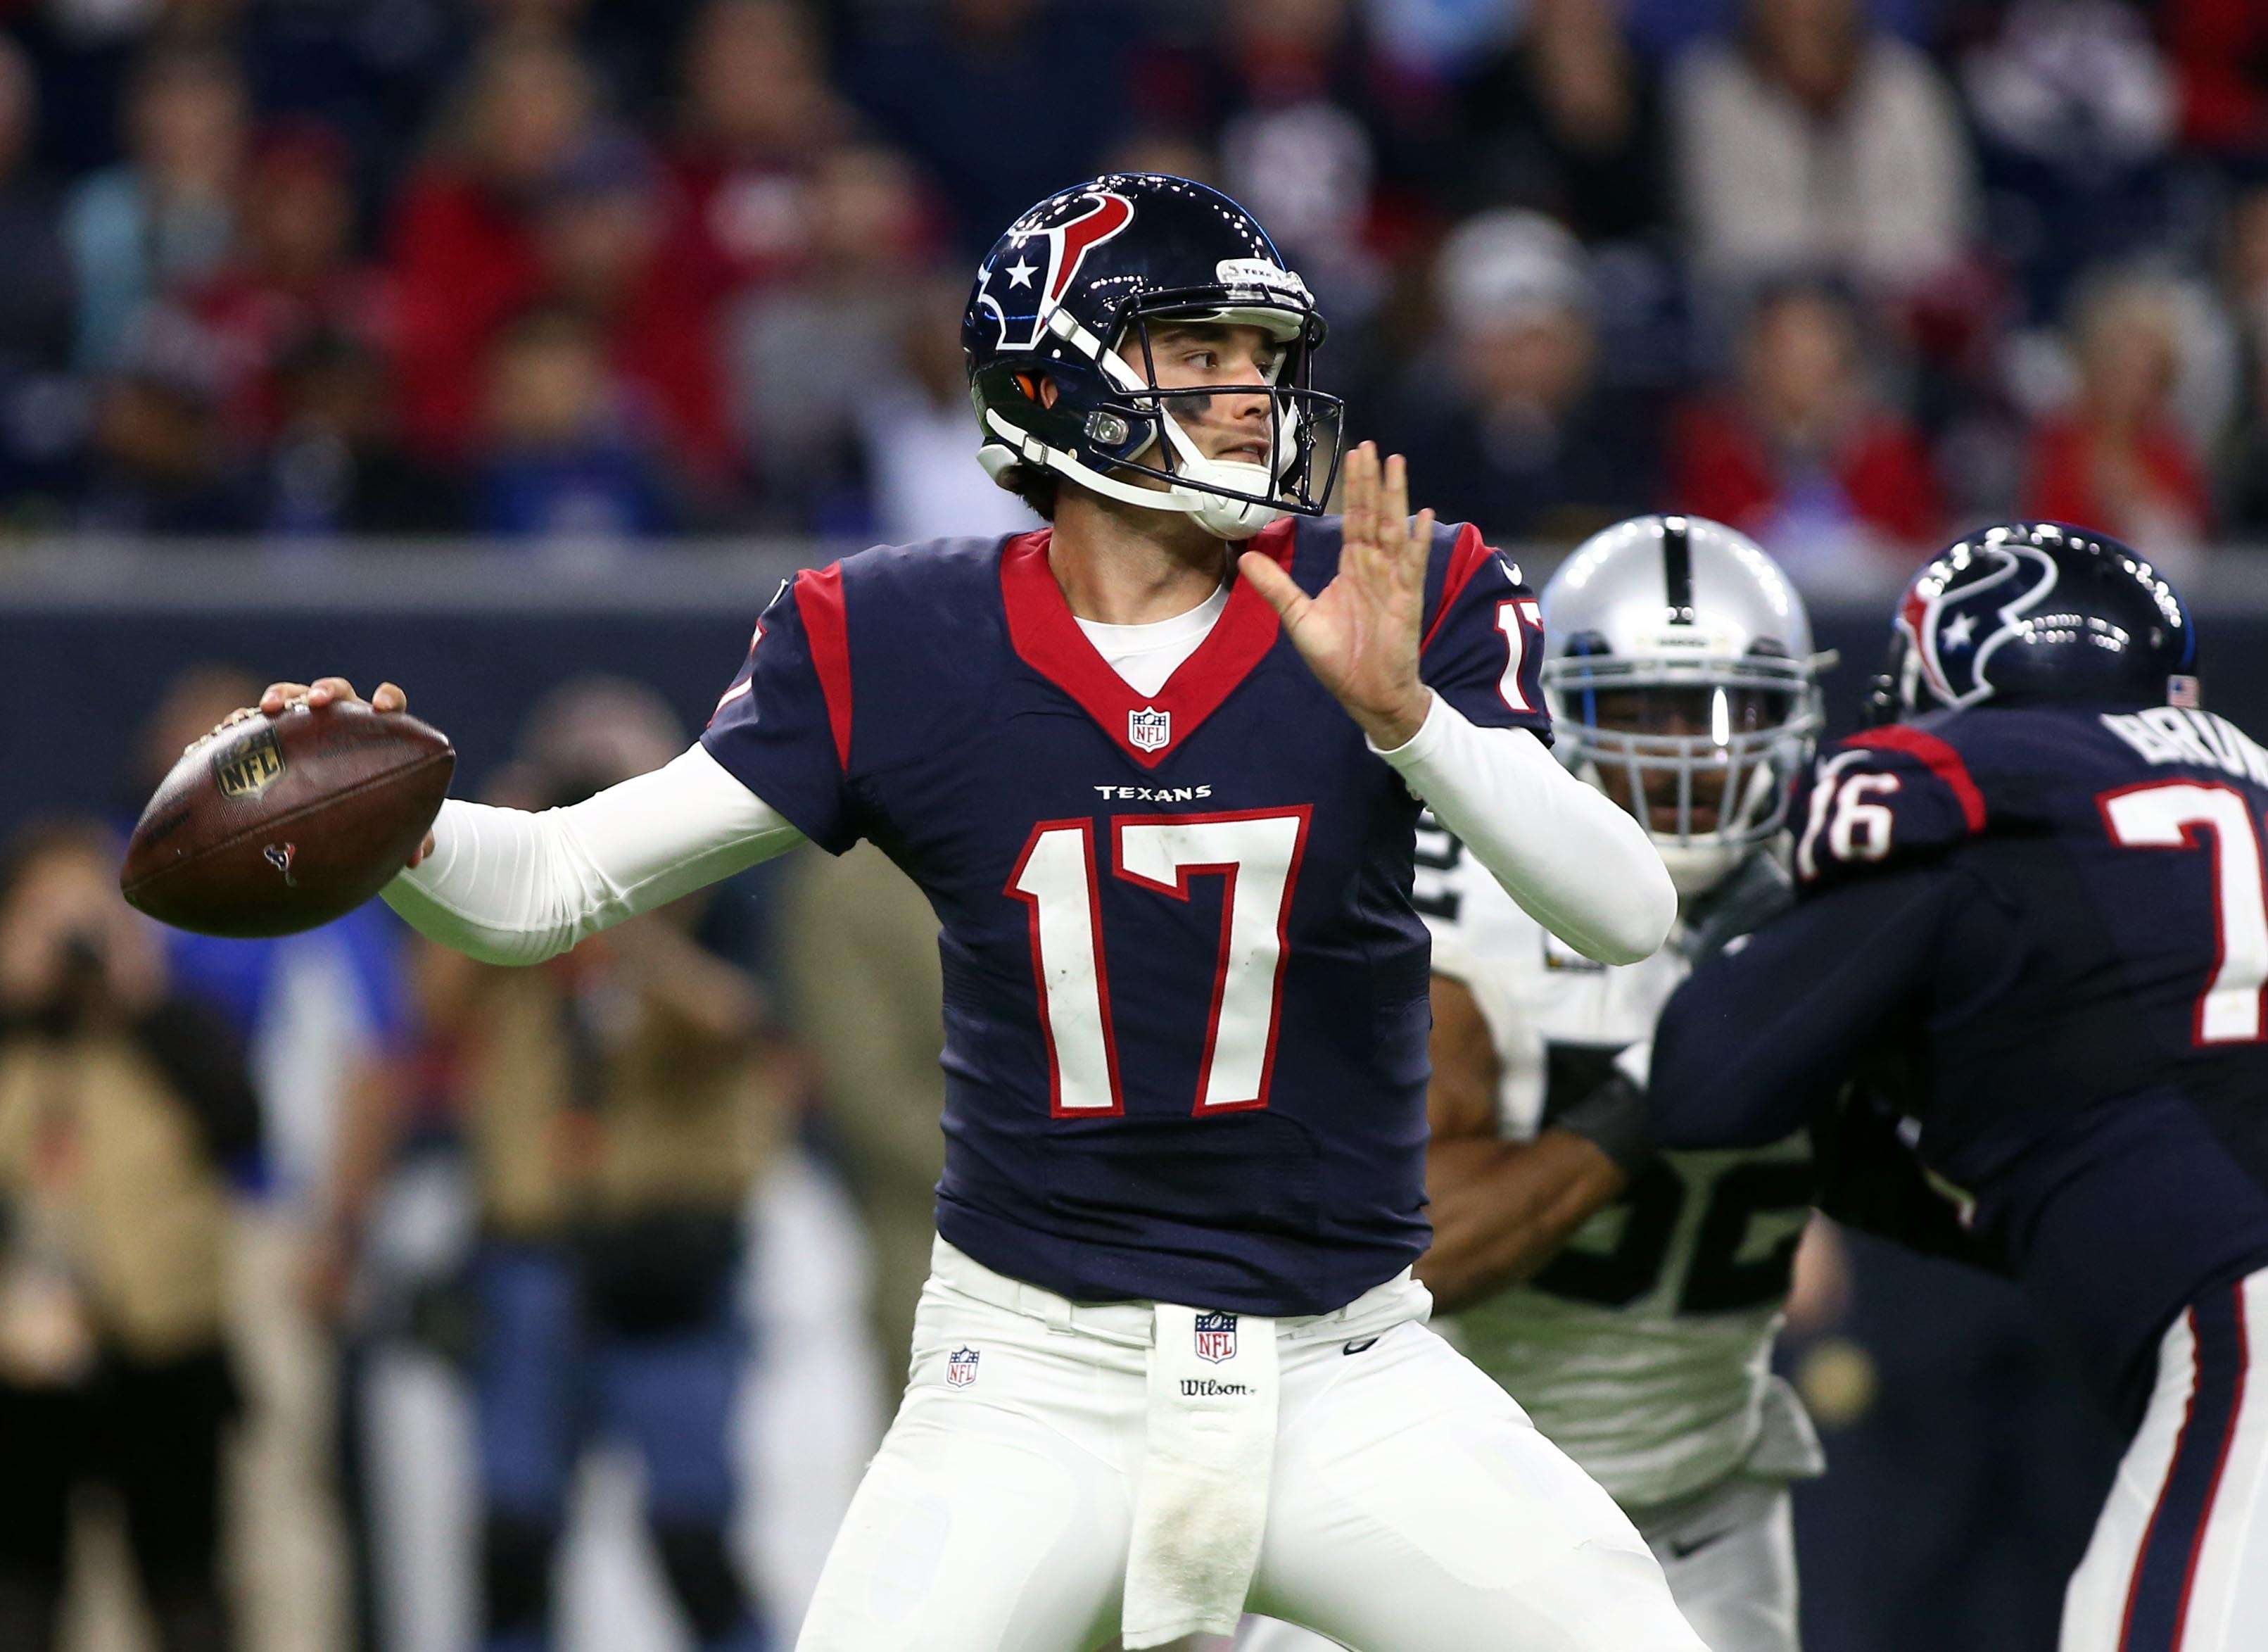 Houston Texans quarterback Brock Osweiler drops back to pass during the fourth quarter against the Oakland Raiders. Photos: USA Today Sports